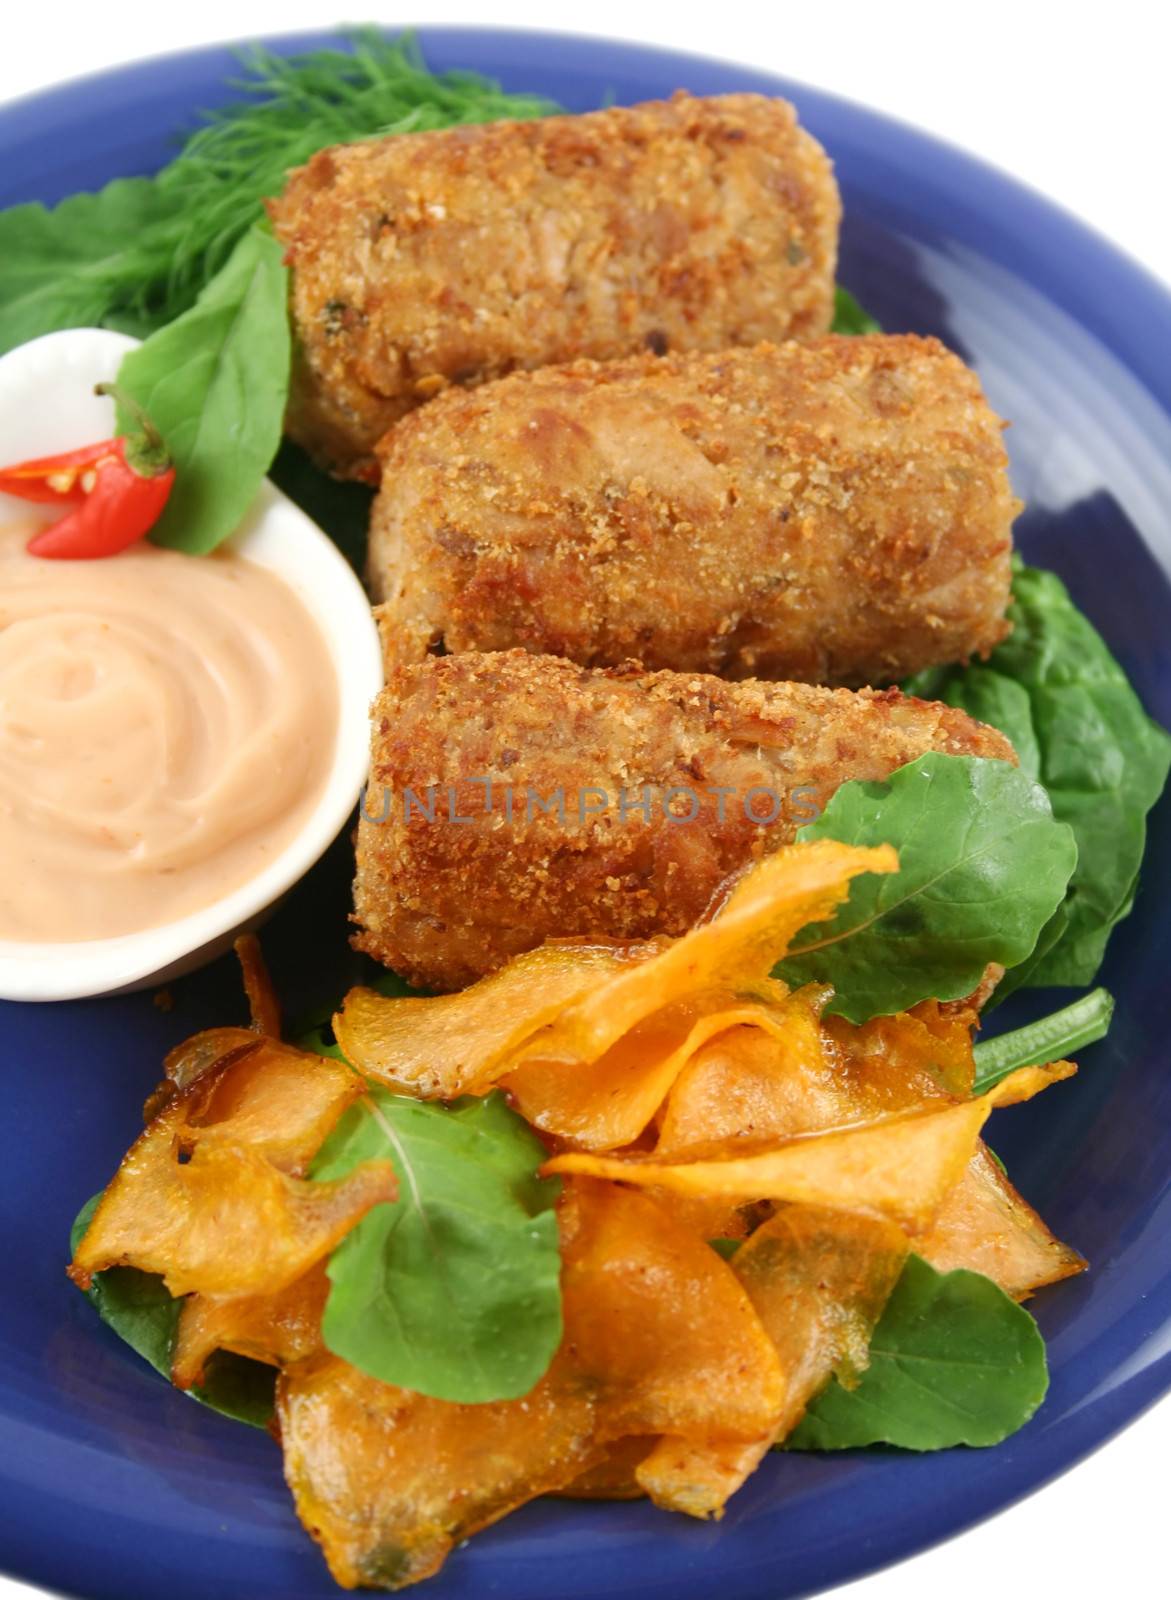 Crumbed tuna croquettes with sweet potatoes and a rocket salad.